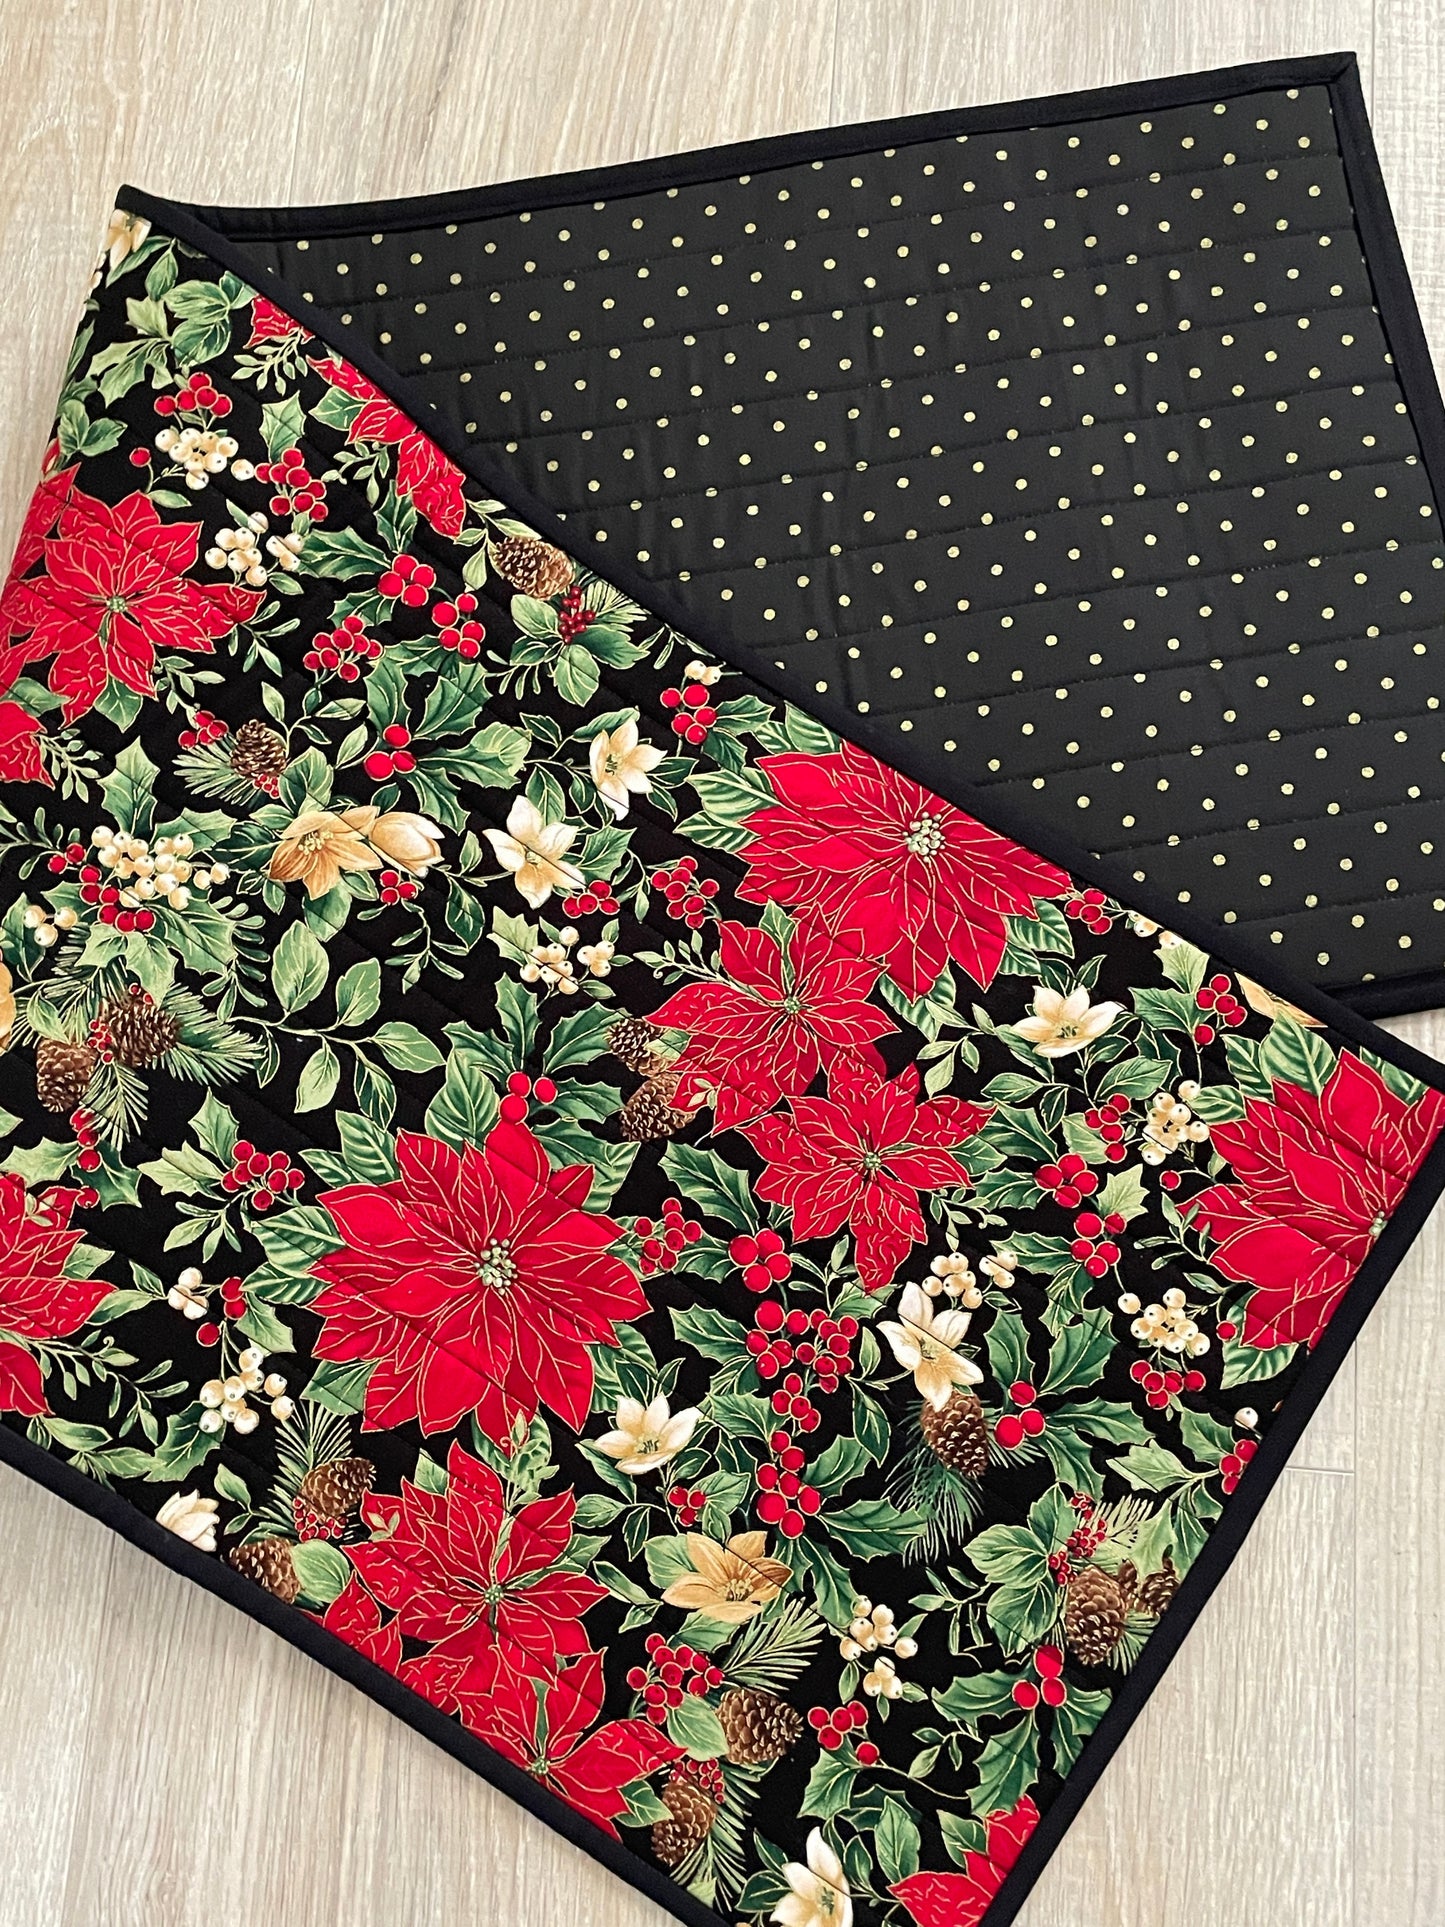 Quilted Christmas Table Runner, Beautiful Red and Black Poinsettia Handmade Runner